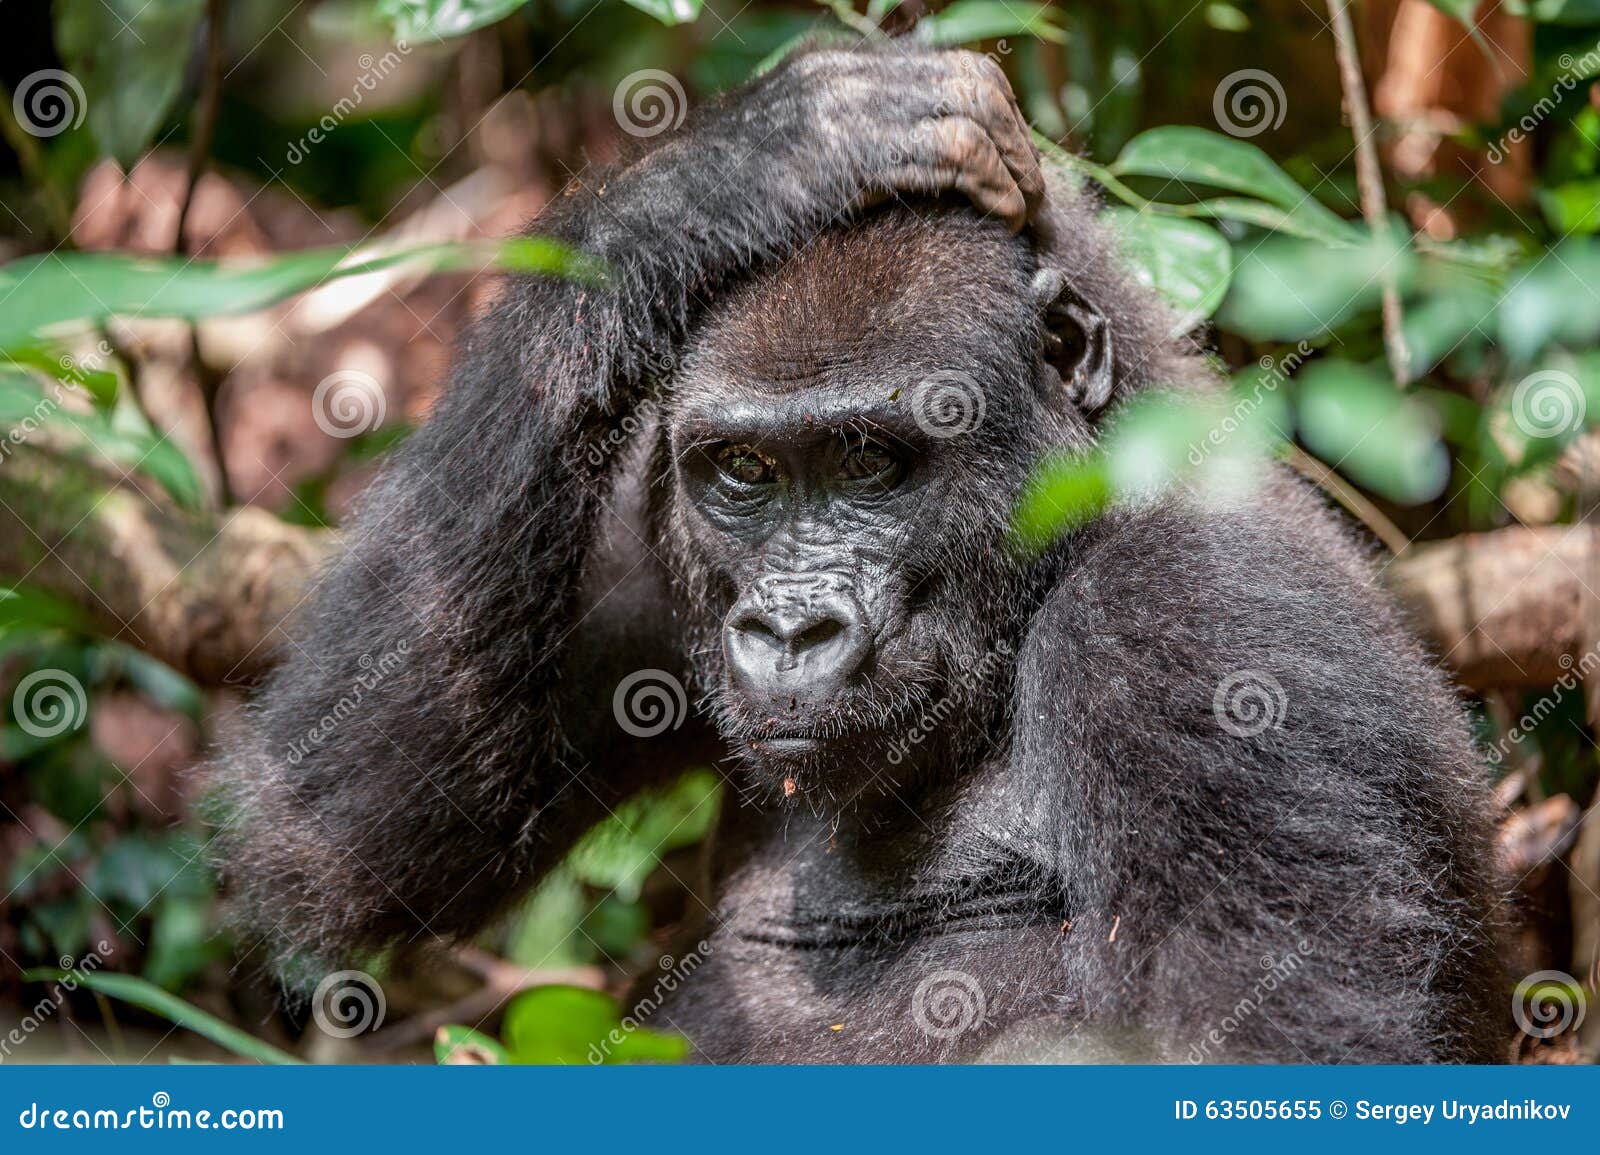 lowland gorilla in jungle congo. portrait of a western lowland gorilla (gorilla gorilla gorilla) close up at a short distance. you